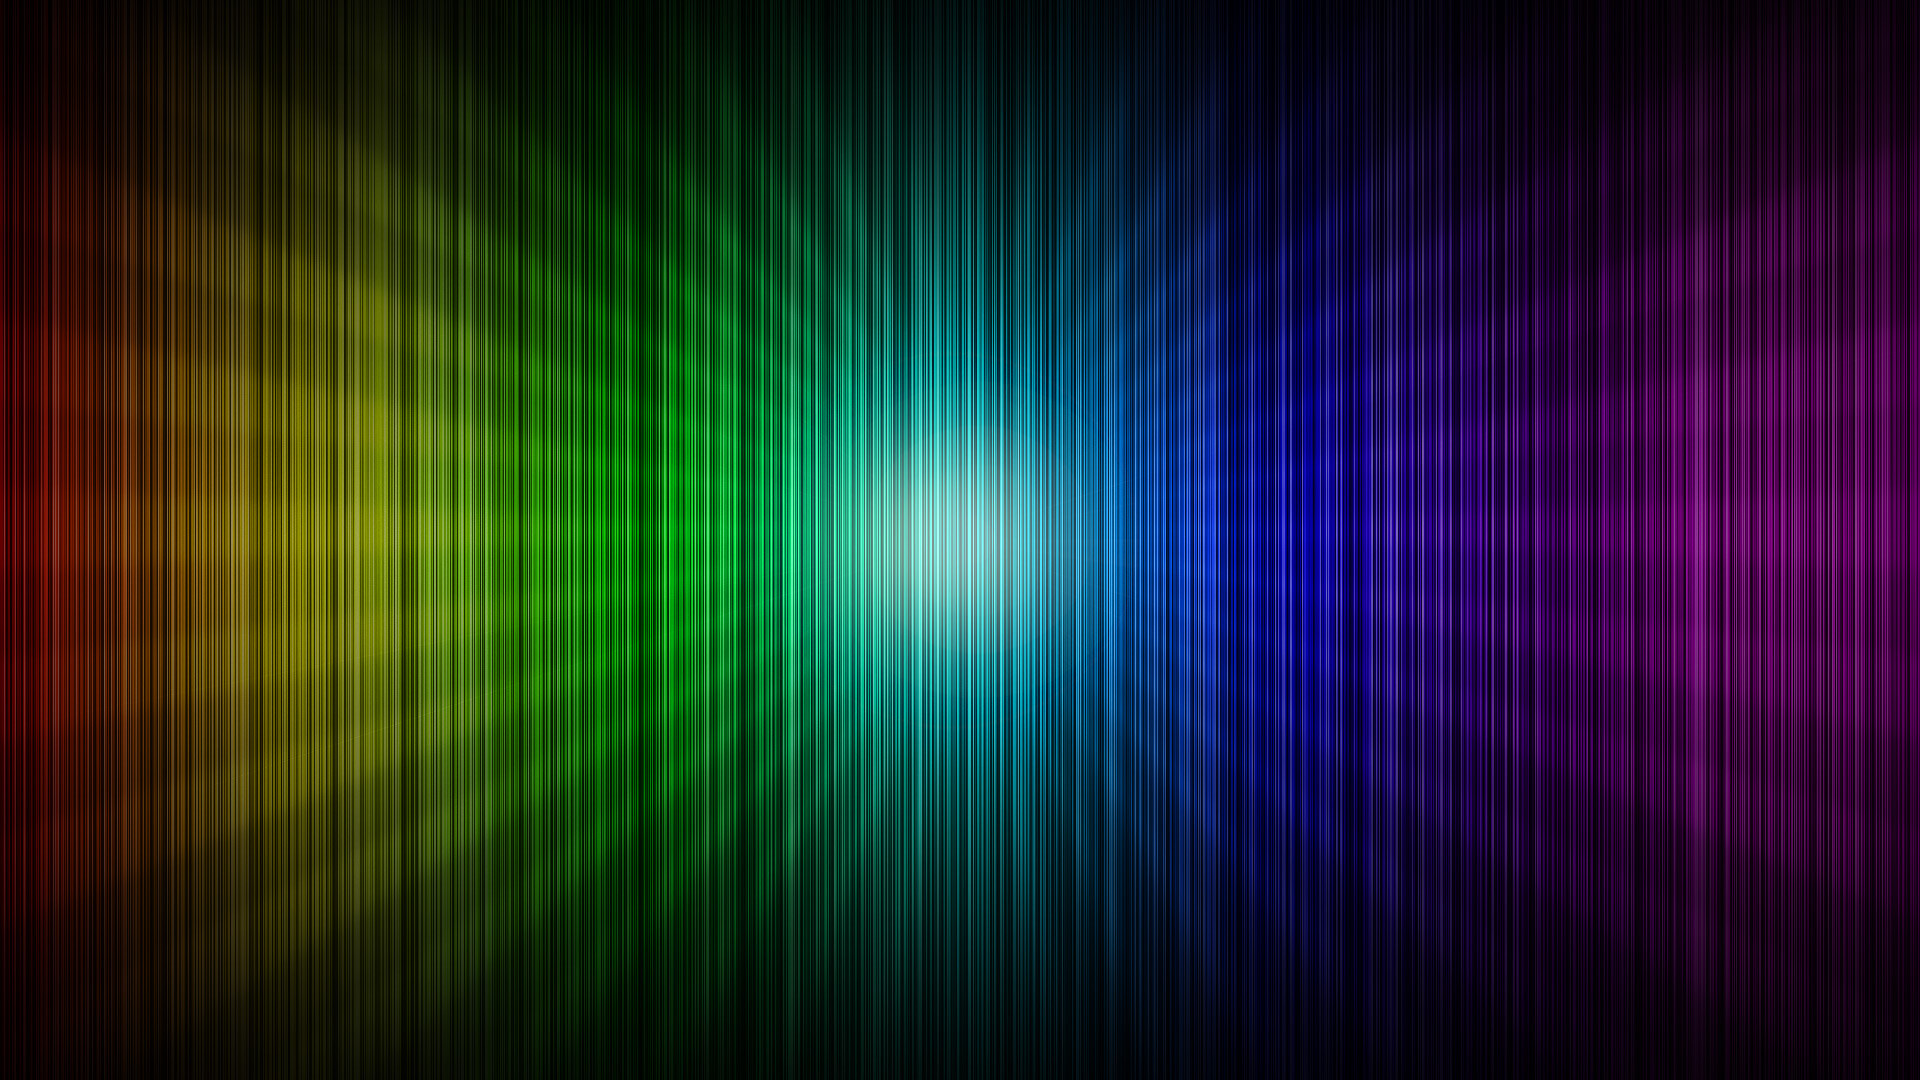 Rainbow Colors: The use of one or more straight lines designed to create a visual sensory impression. 1920x1080 Full HD Wallpaper.